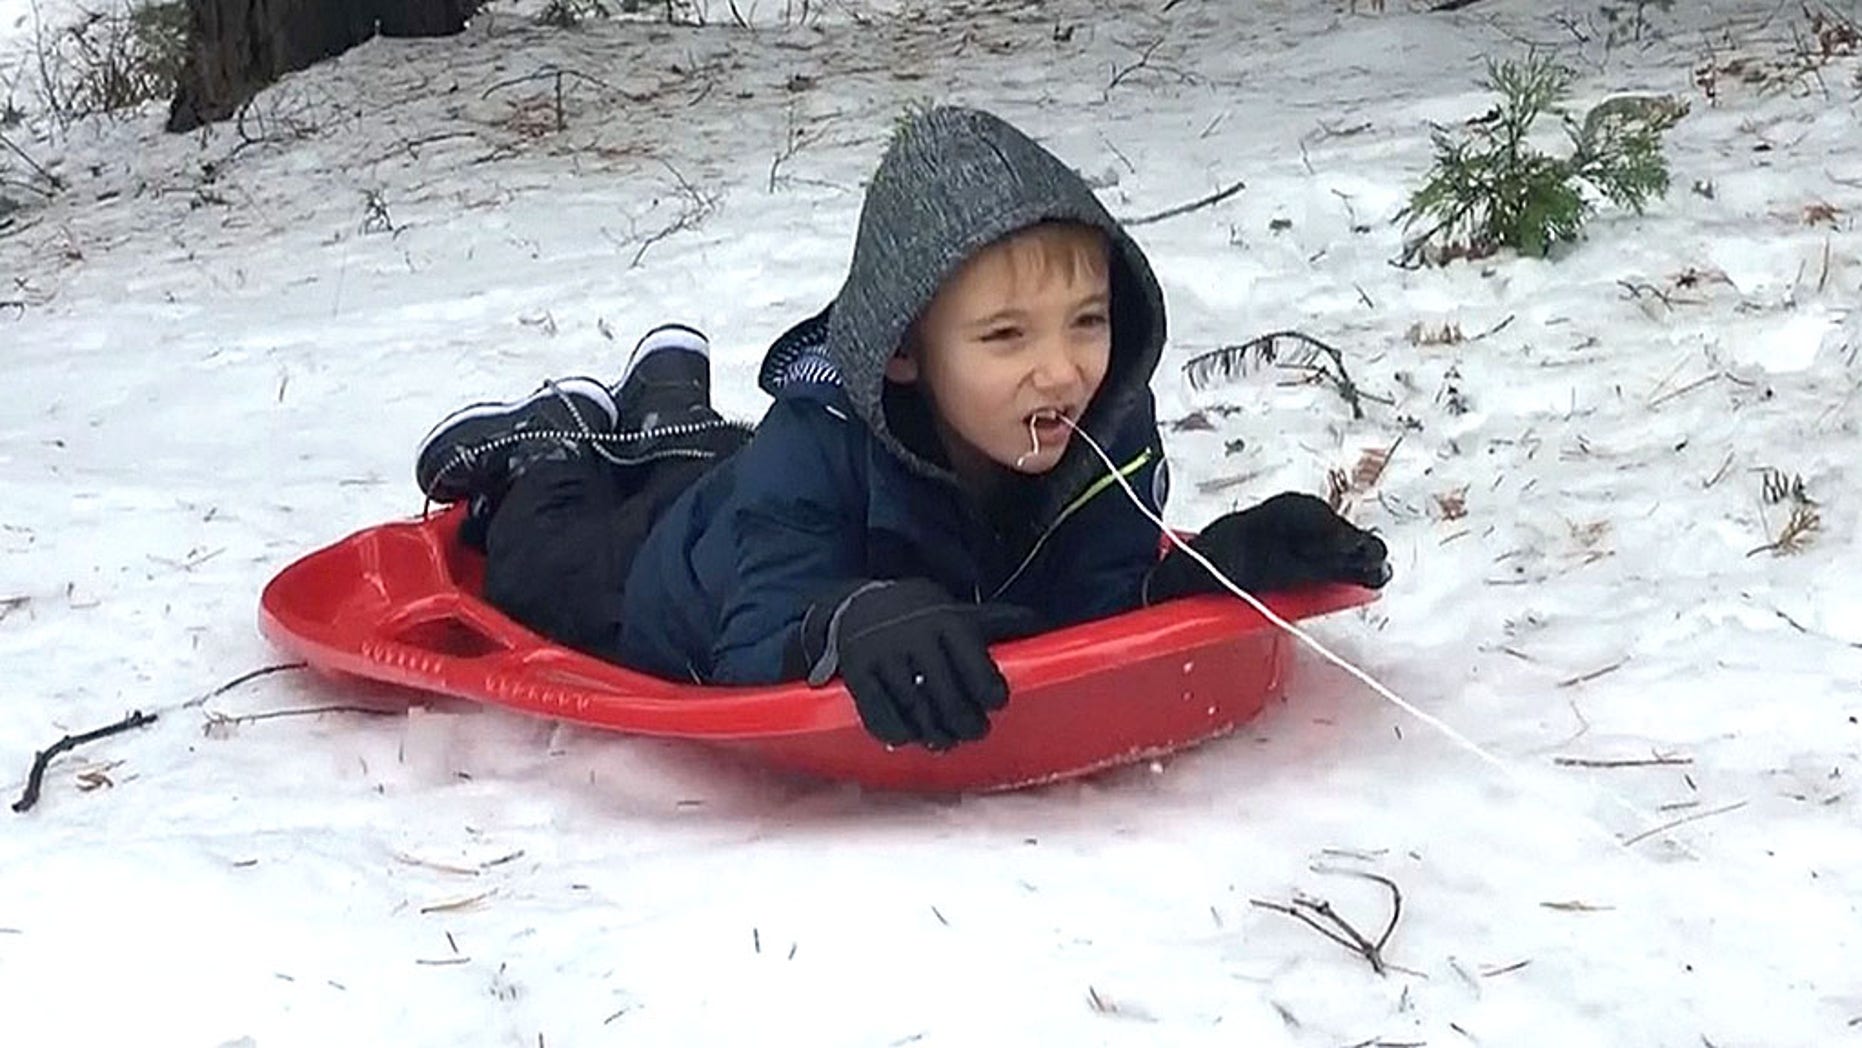 California boy uses sled trick to yank out loose tooth